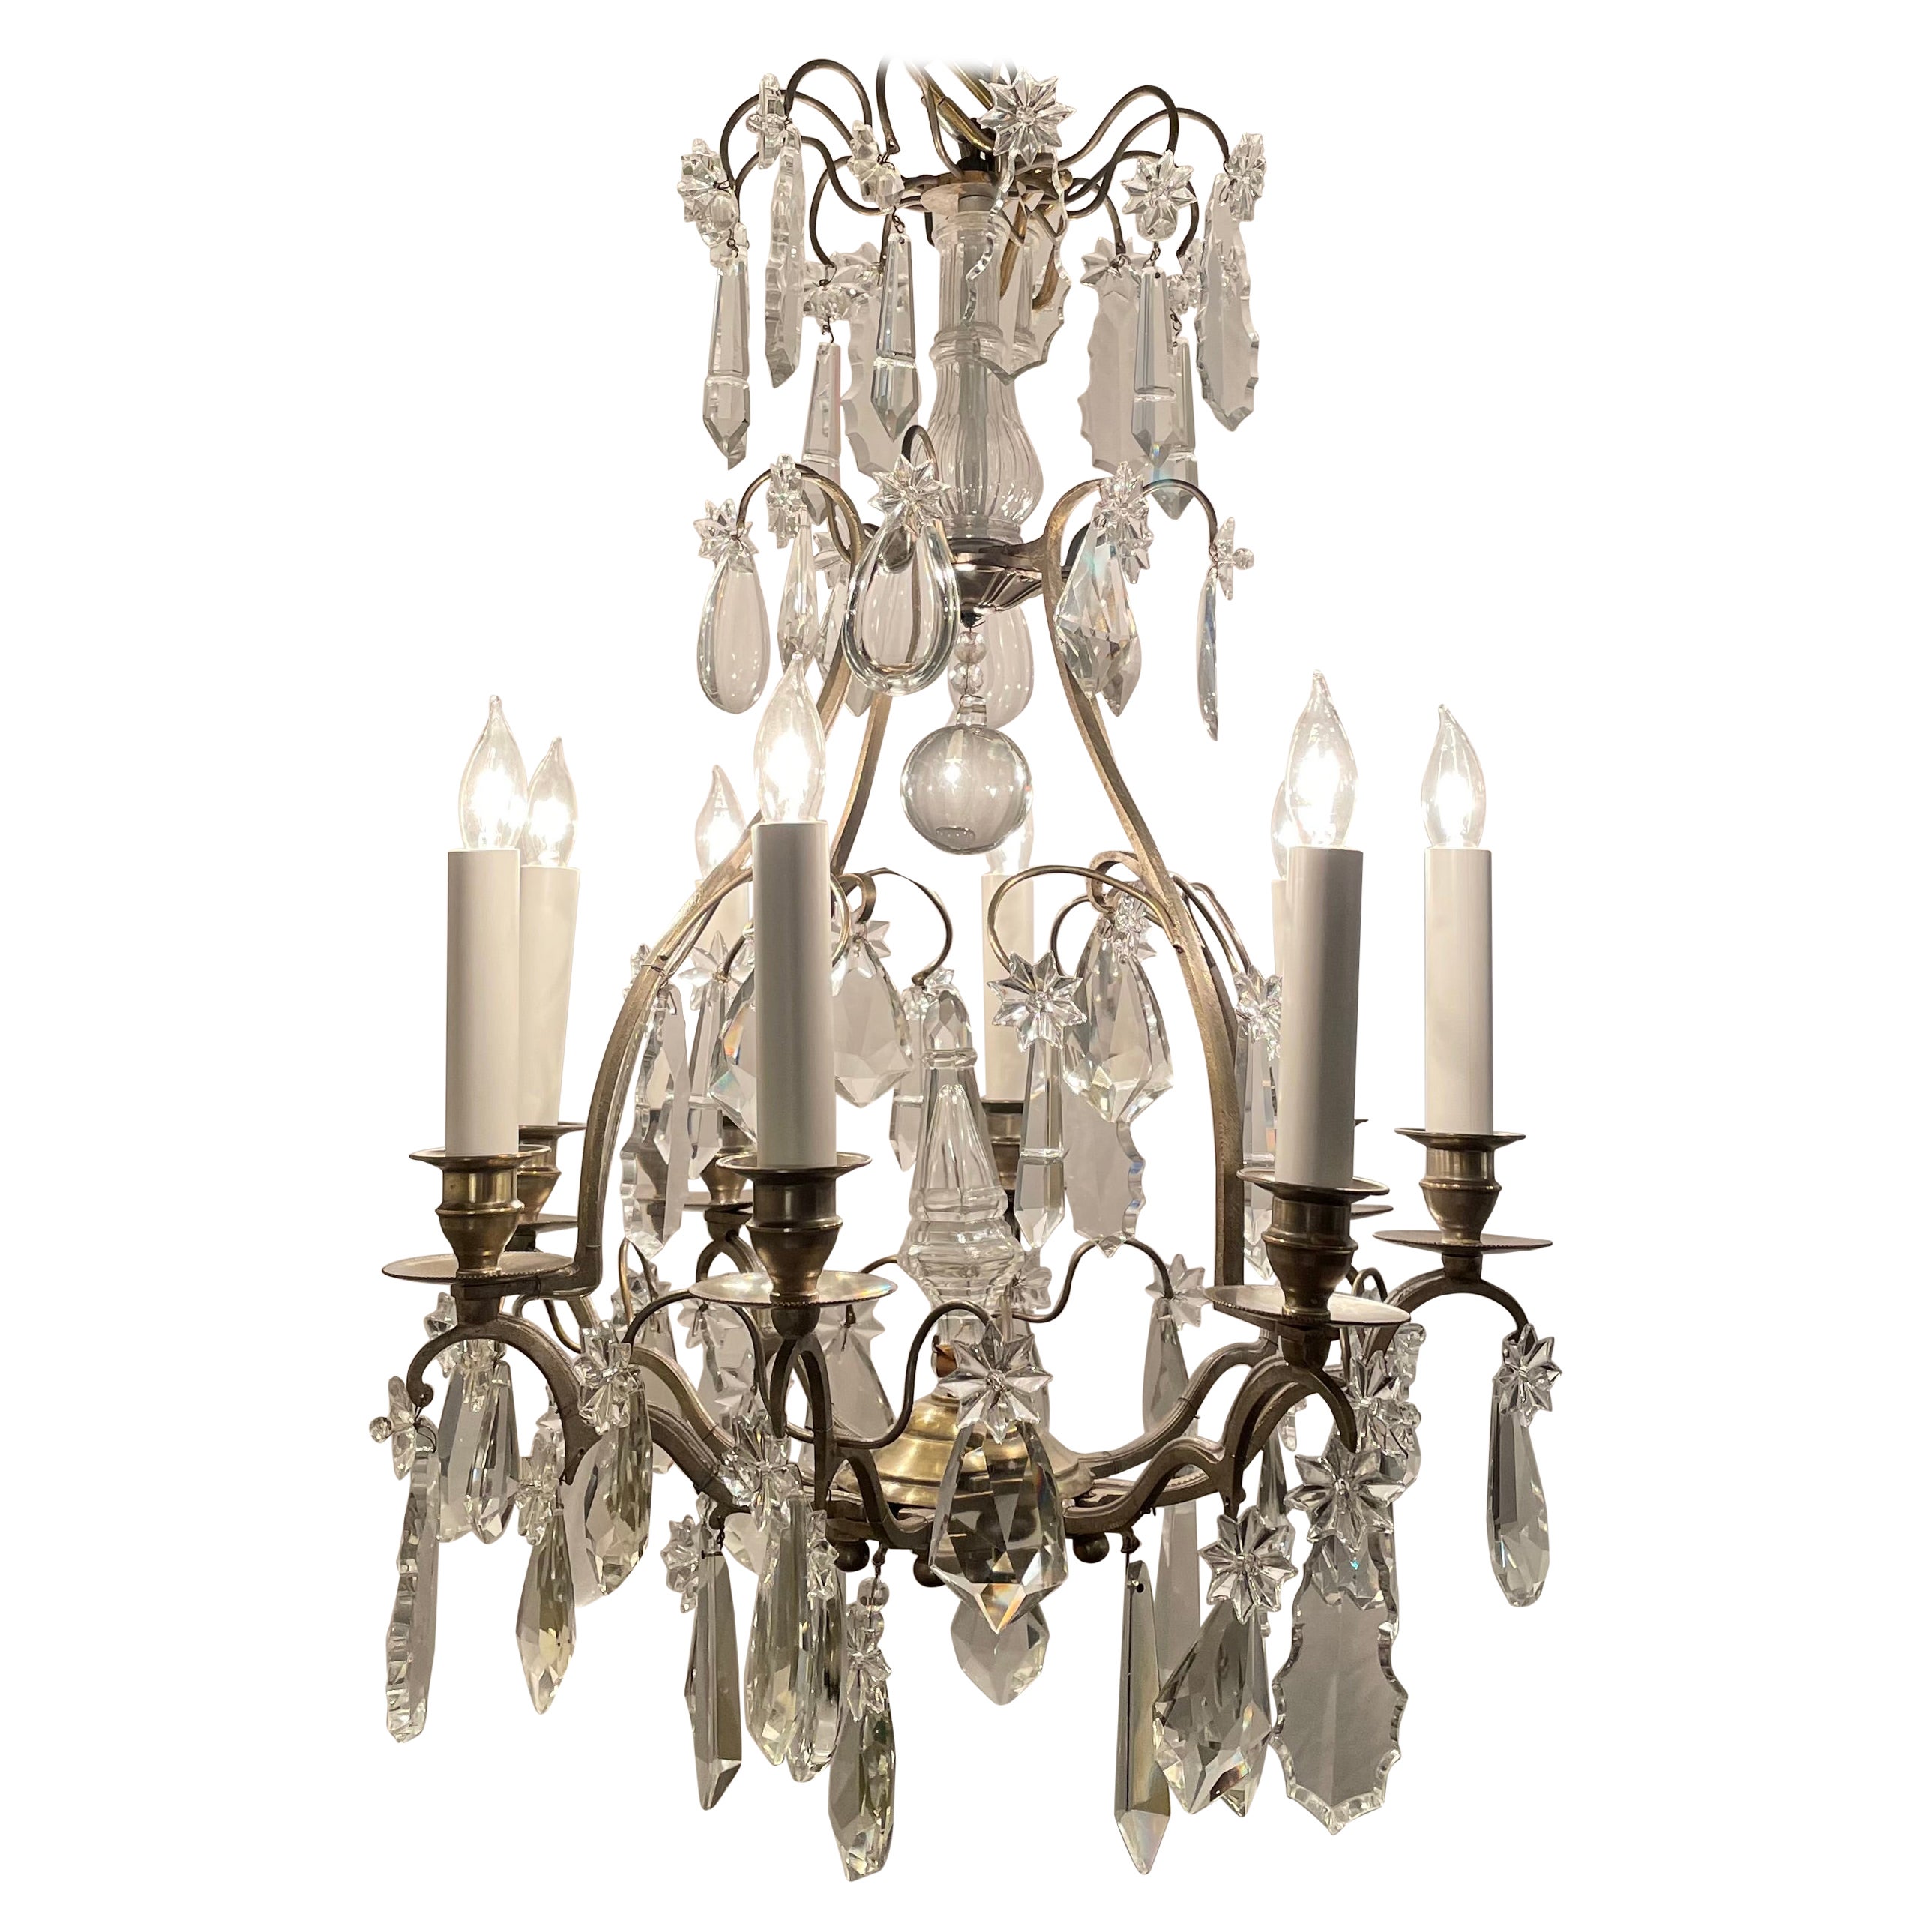 Antique French 8 Light Bronze and Crystal Chandelier, circa 1890-1910 For Sale